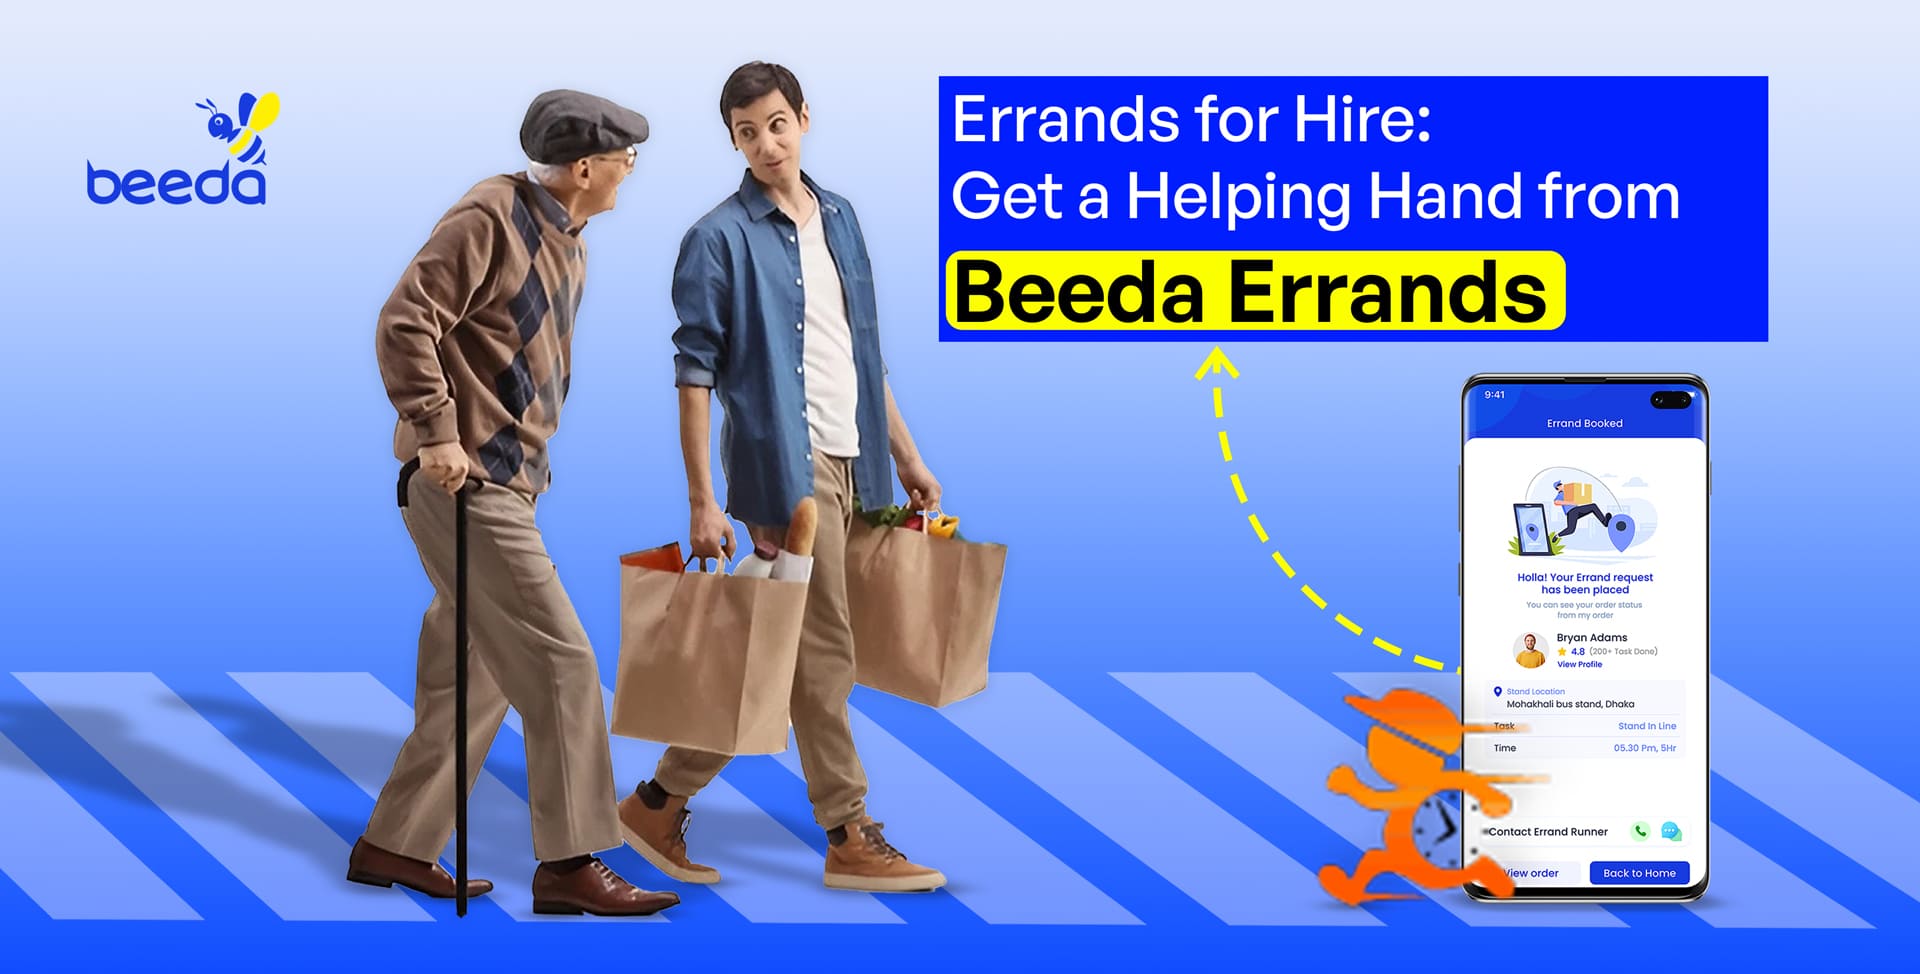 Errands for Hire: Get a Helping Hand from Beeda Errands